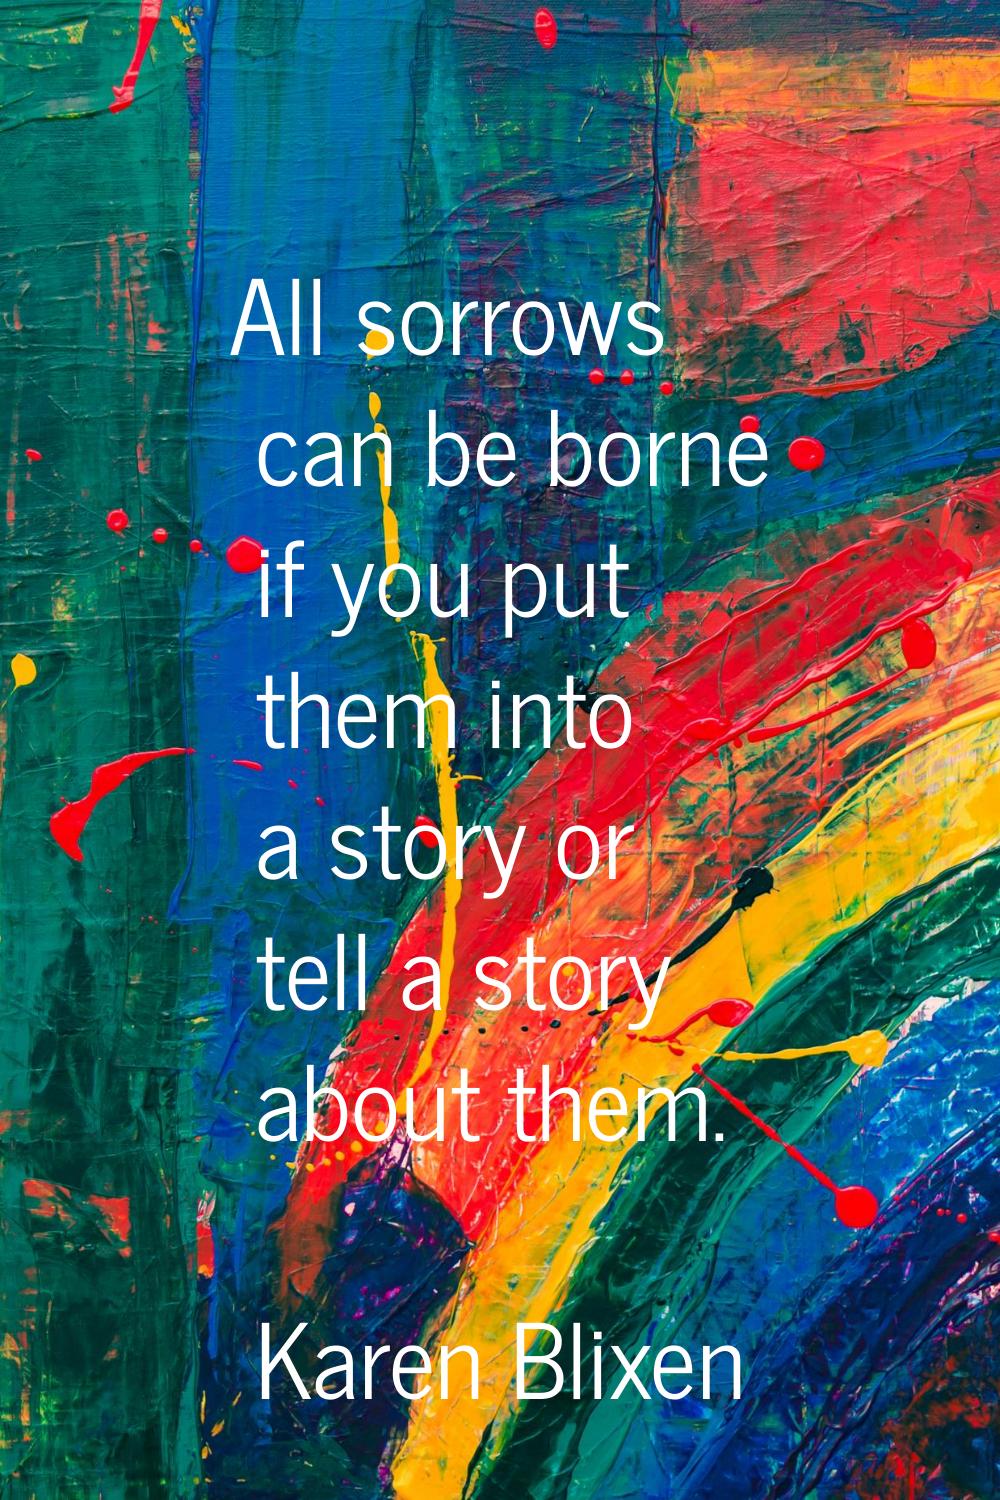 All sorrows can be borne if you put them into a story or tell a story about them.